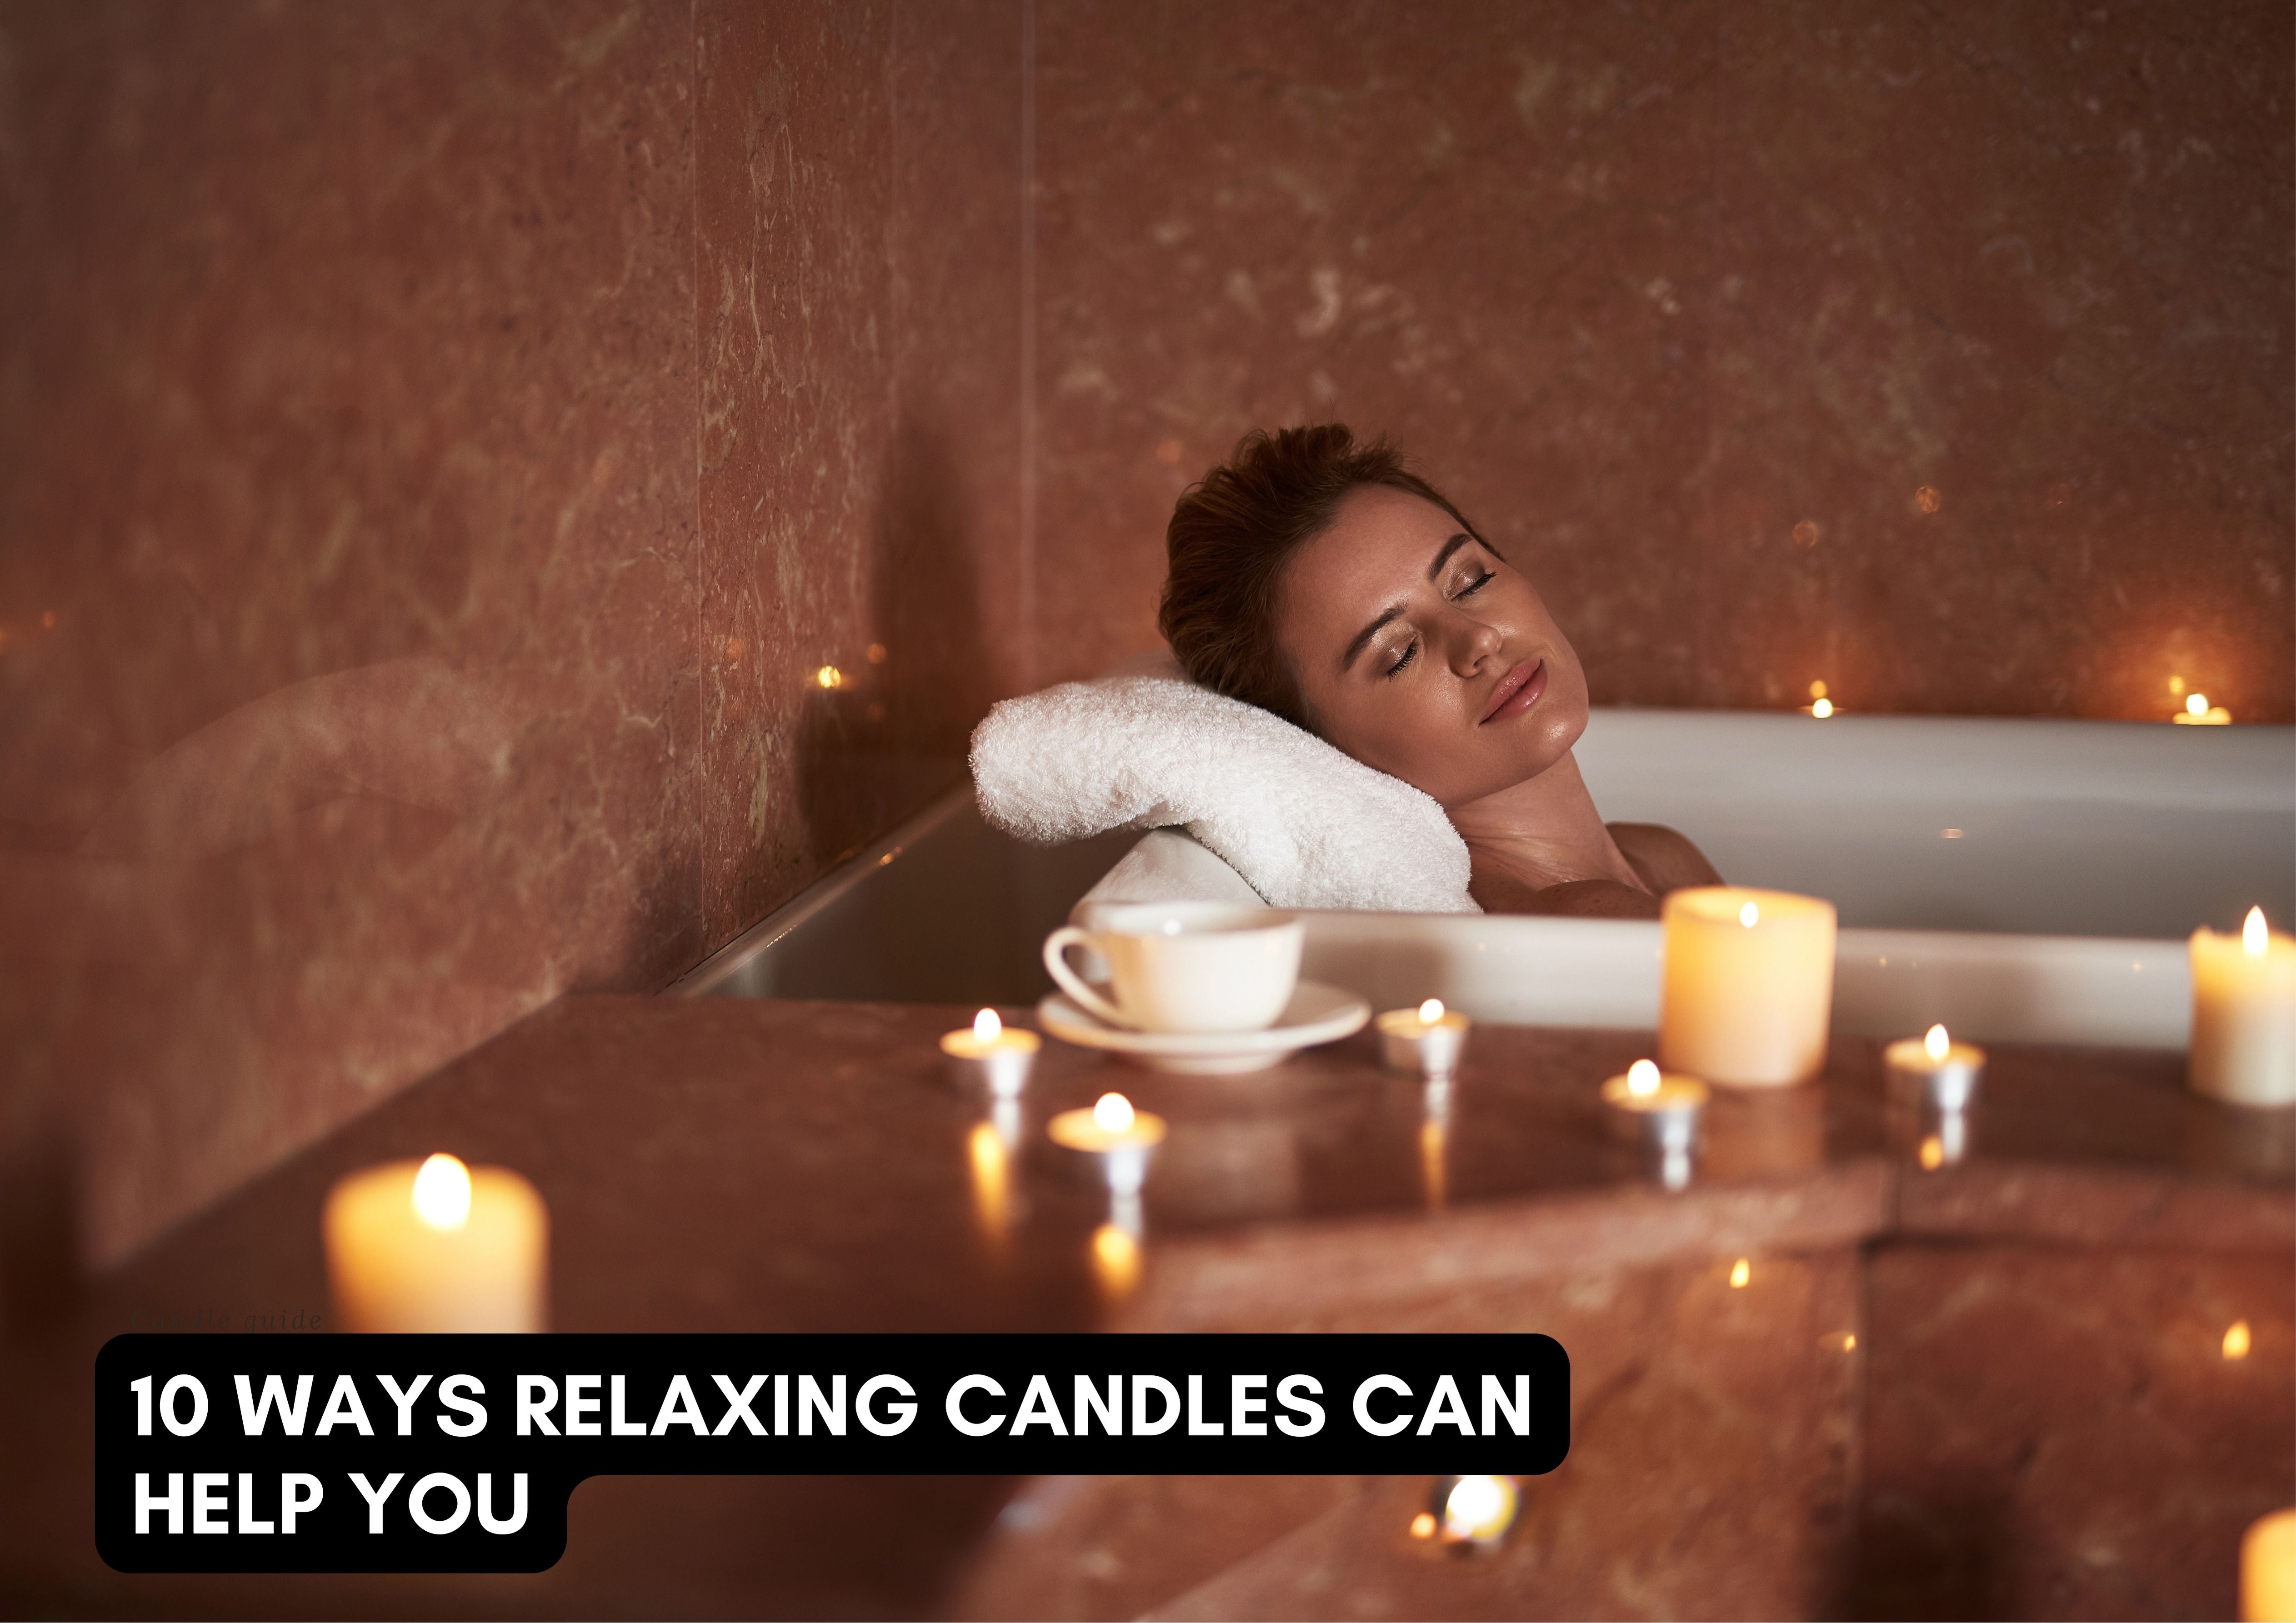 10 ways relaxing candles can help you